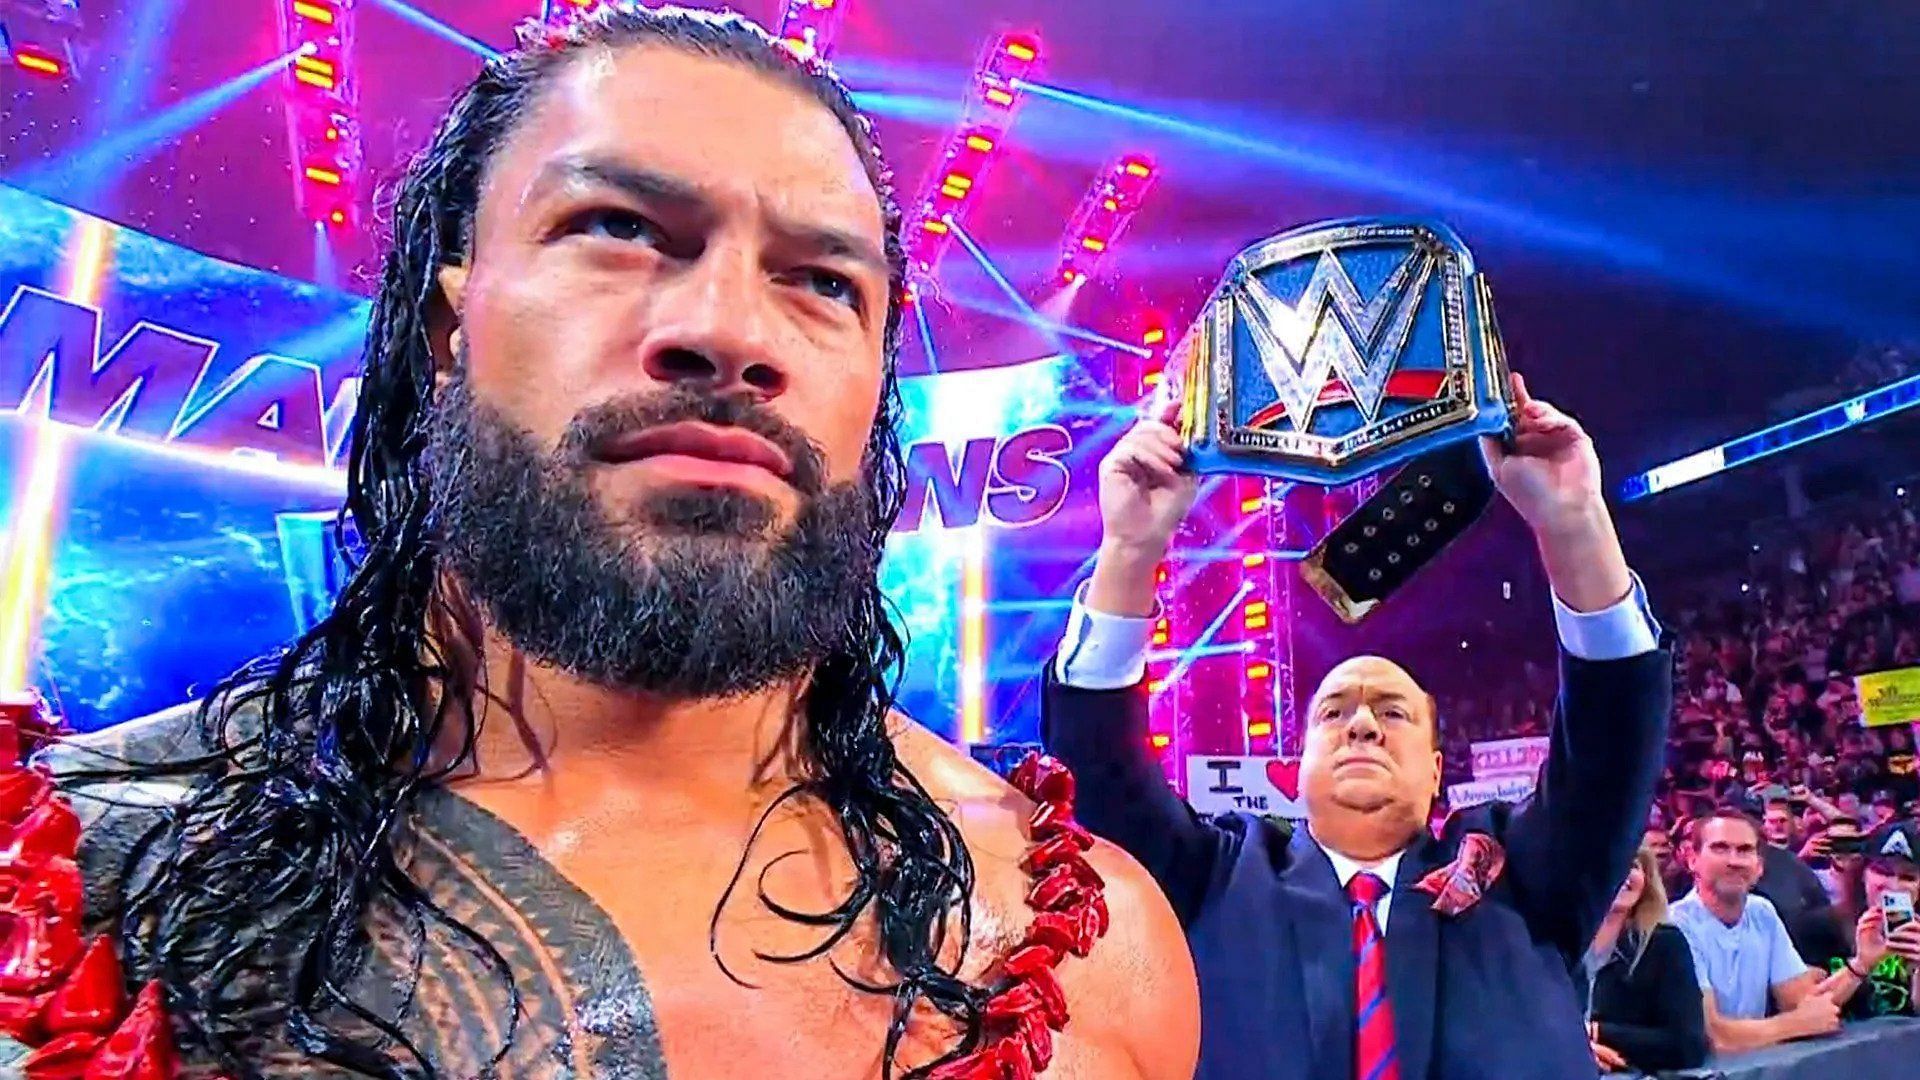 Roman Reigns is one his way to become one of the greatest WWE Superstars ever!